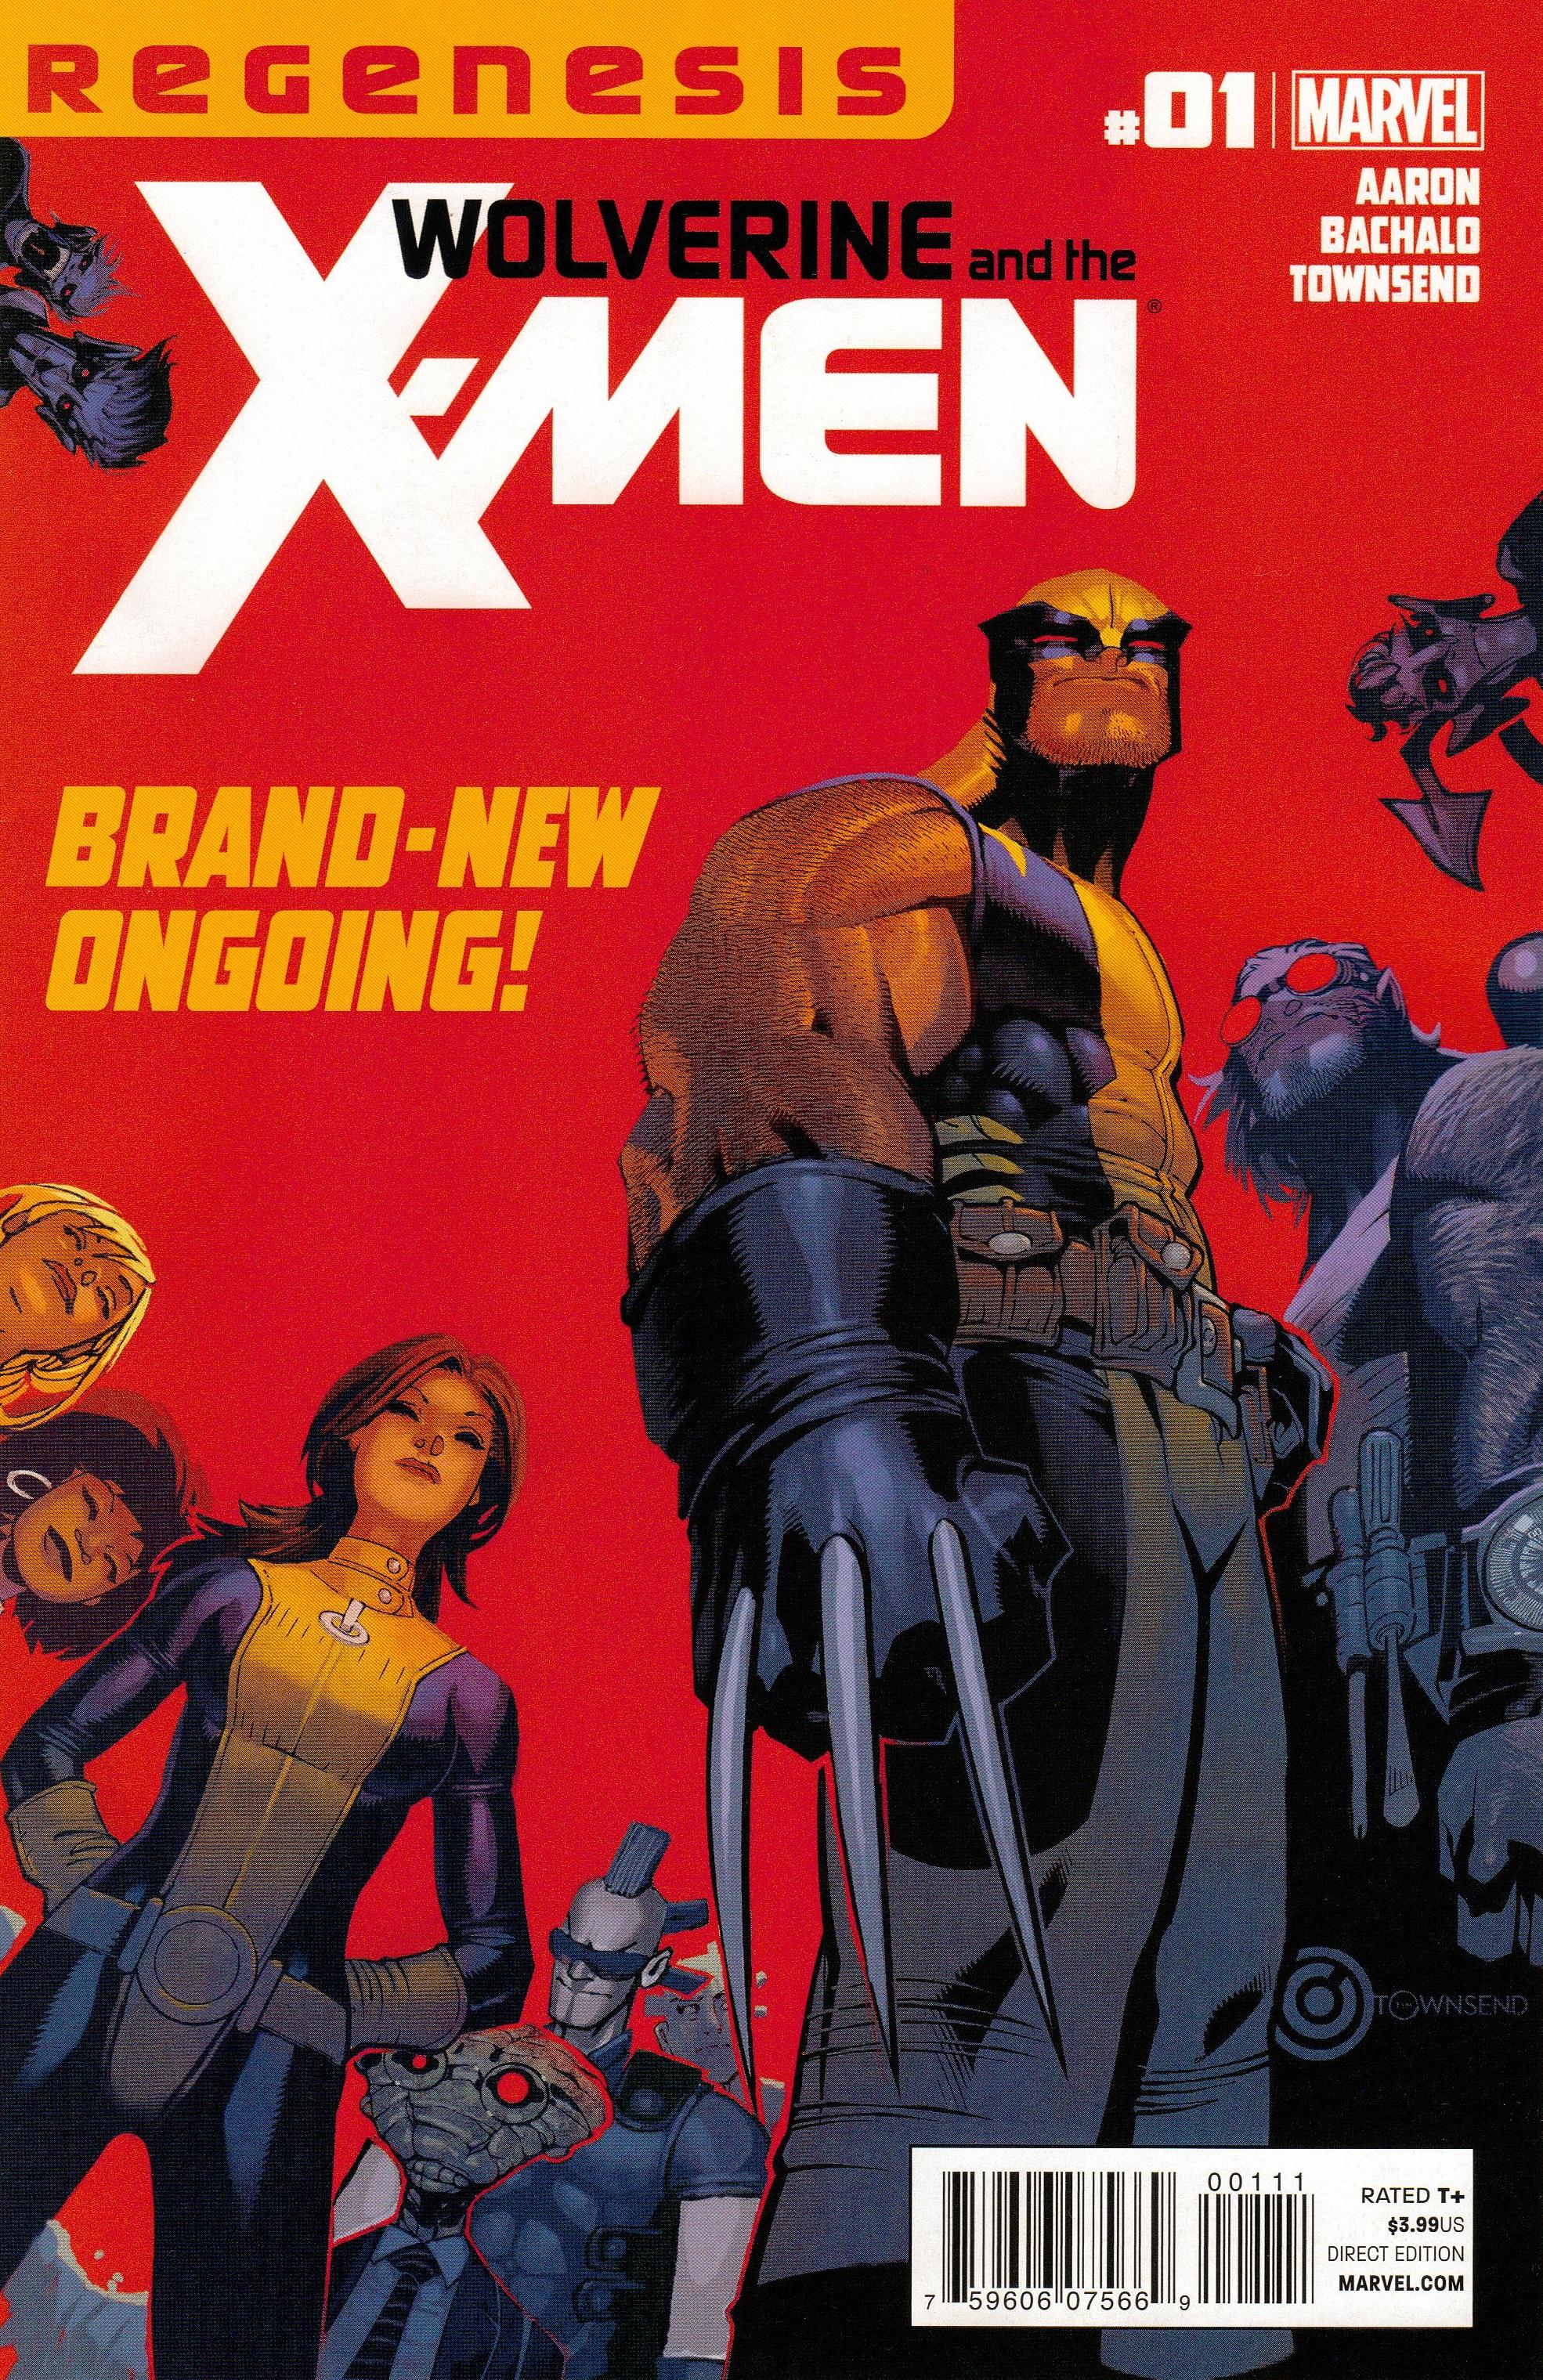 Wolverine and the X-Men Vol. 1 #1